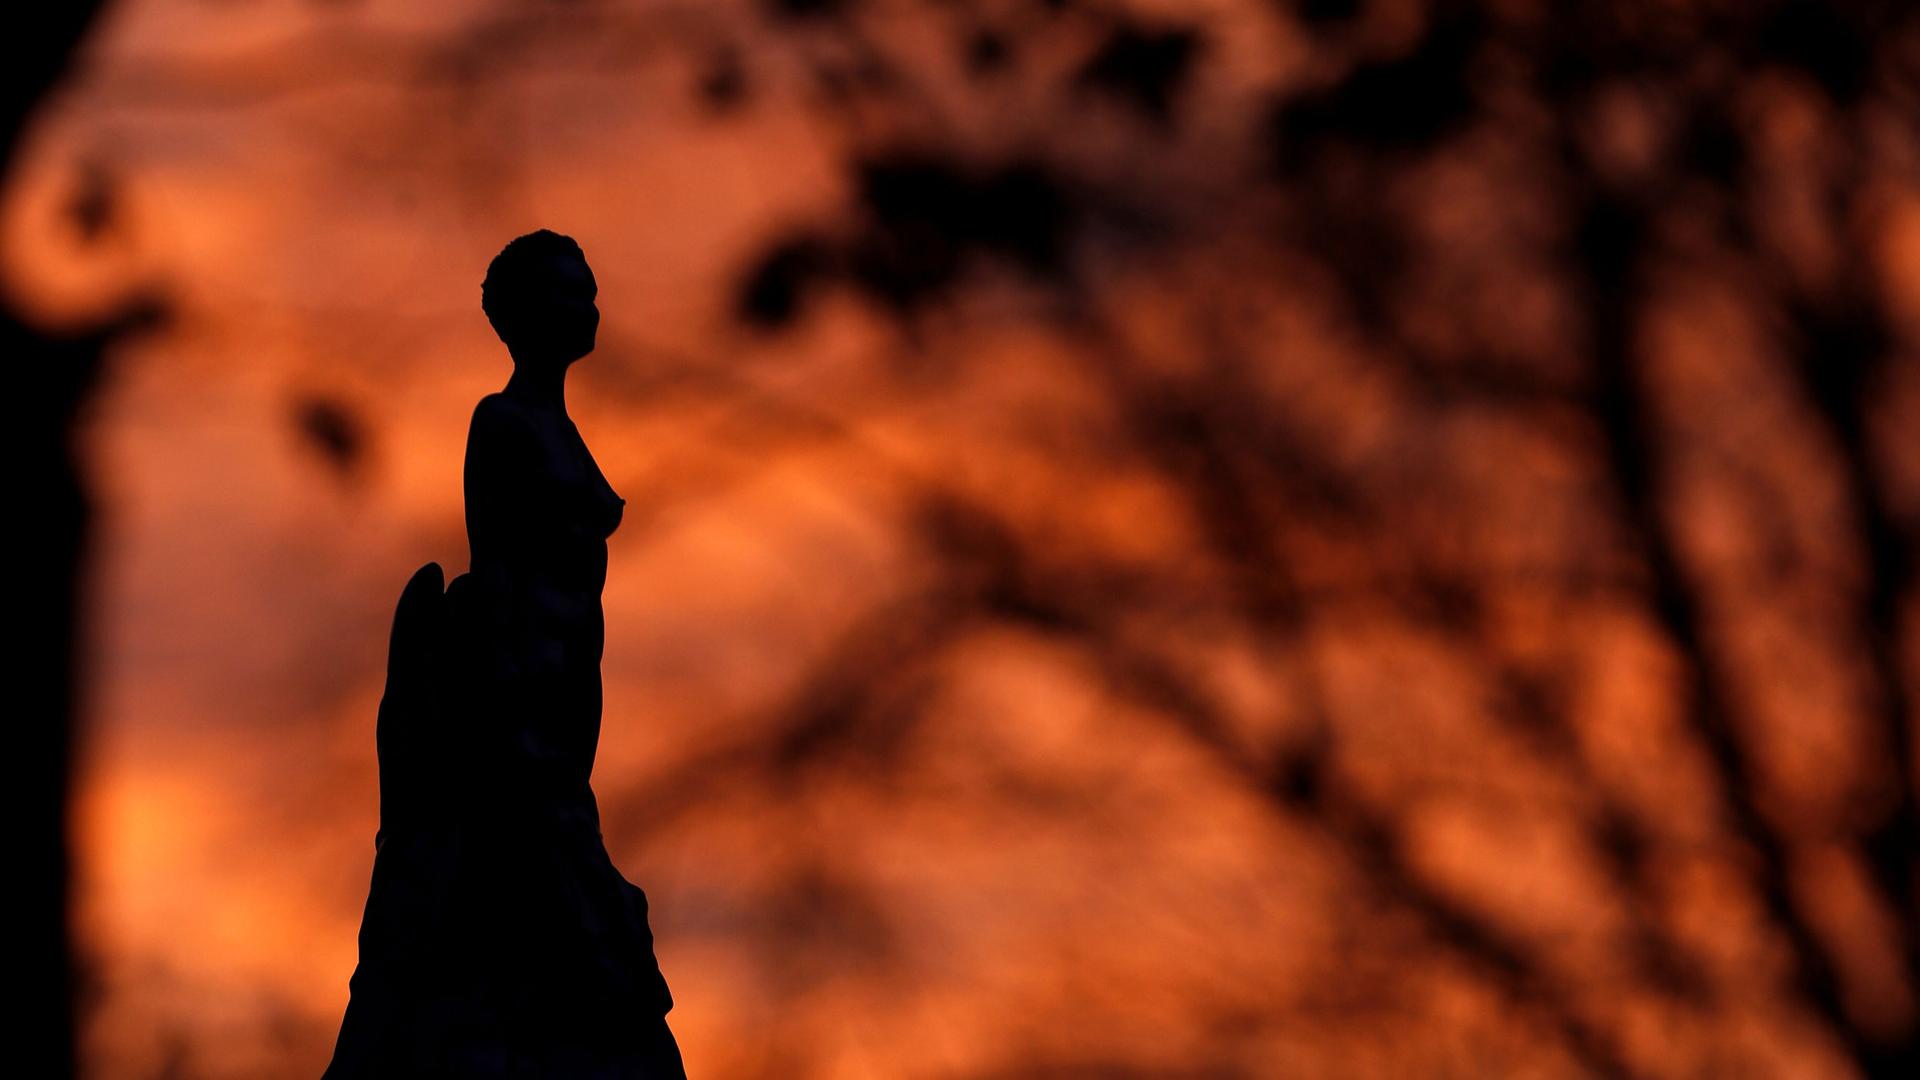 The dark silhouetted of a statue is shown with the orange and red colors of a sunset in the distance.